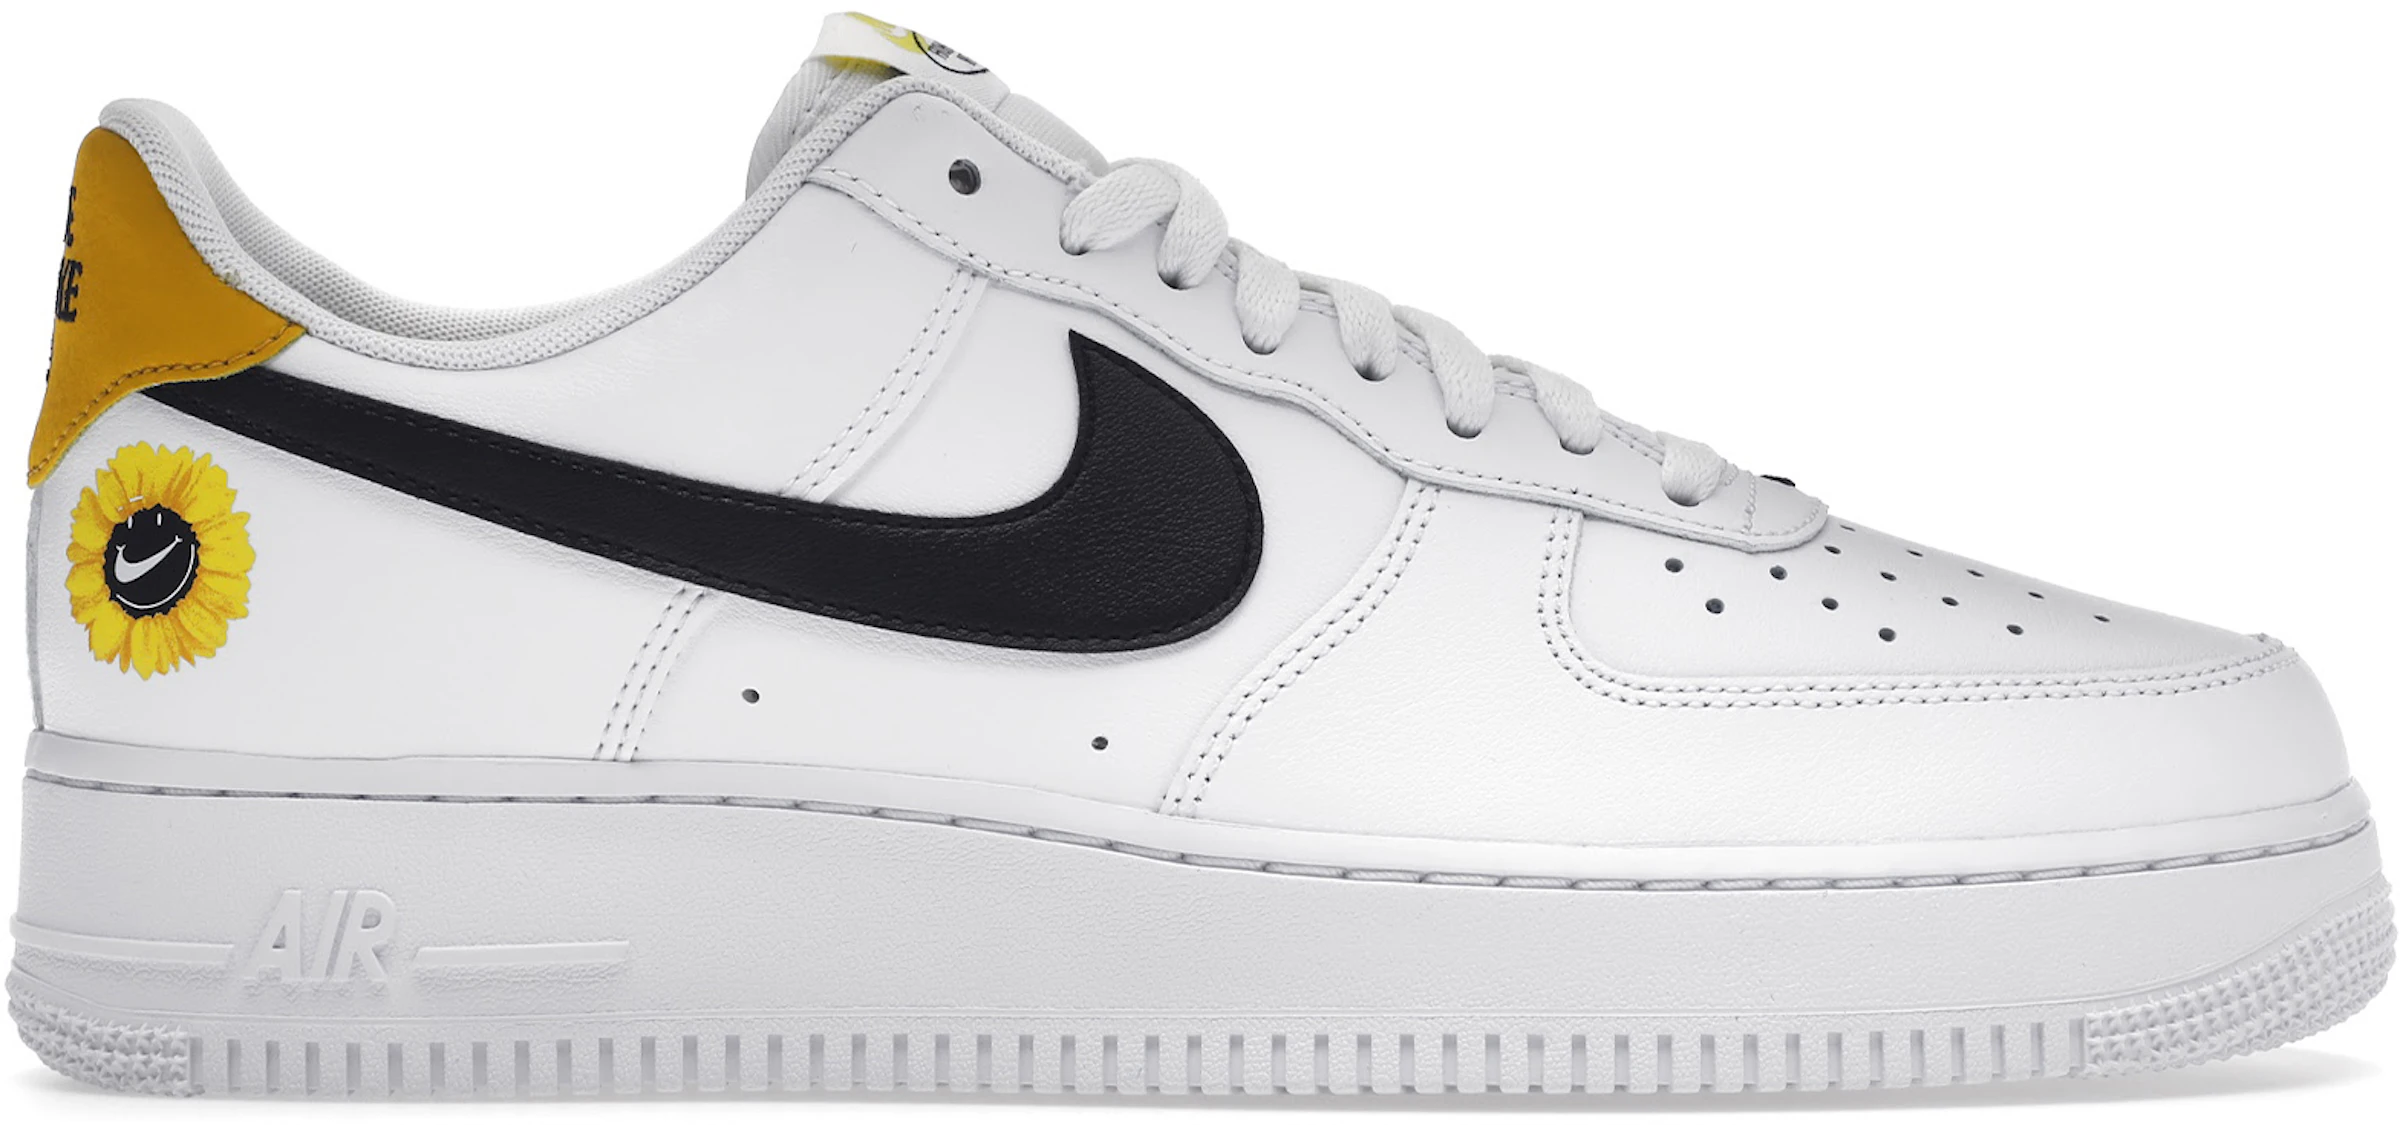 demoler Salida impulso Nike Air Force 1 Low Have a Nike Day White Gold - DM0118-100 - ES